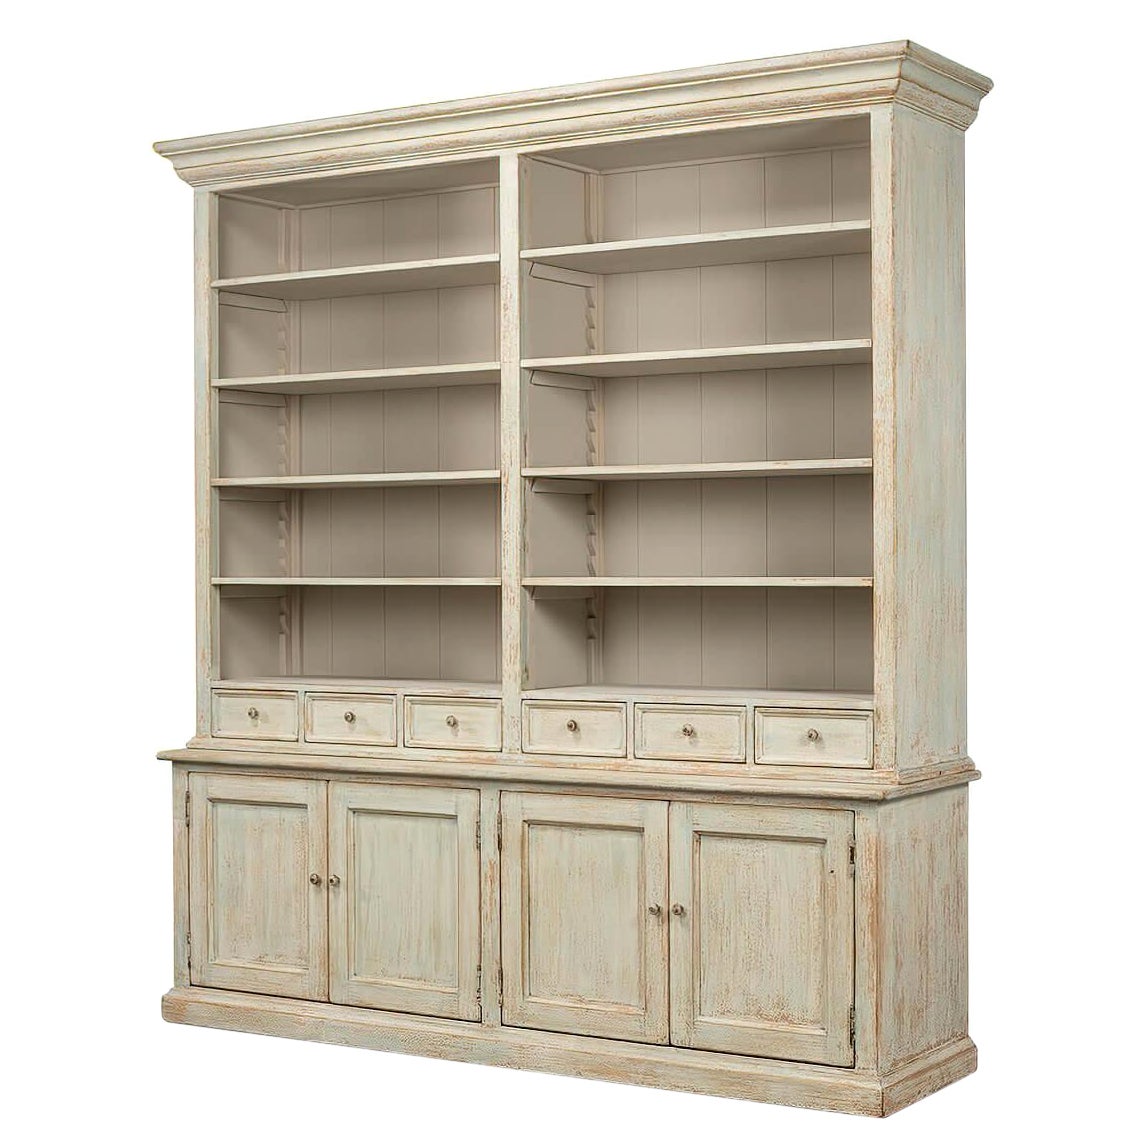 Rustic Painted Bookcase For Sale